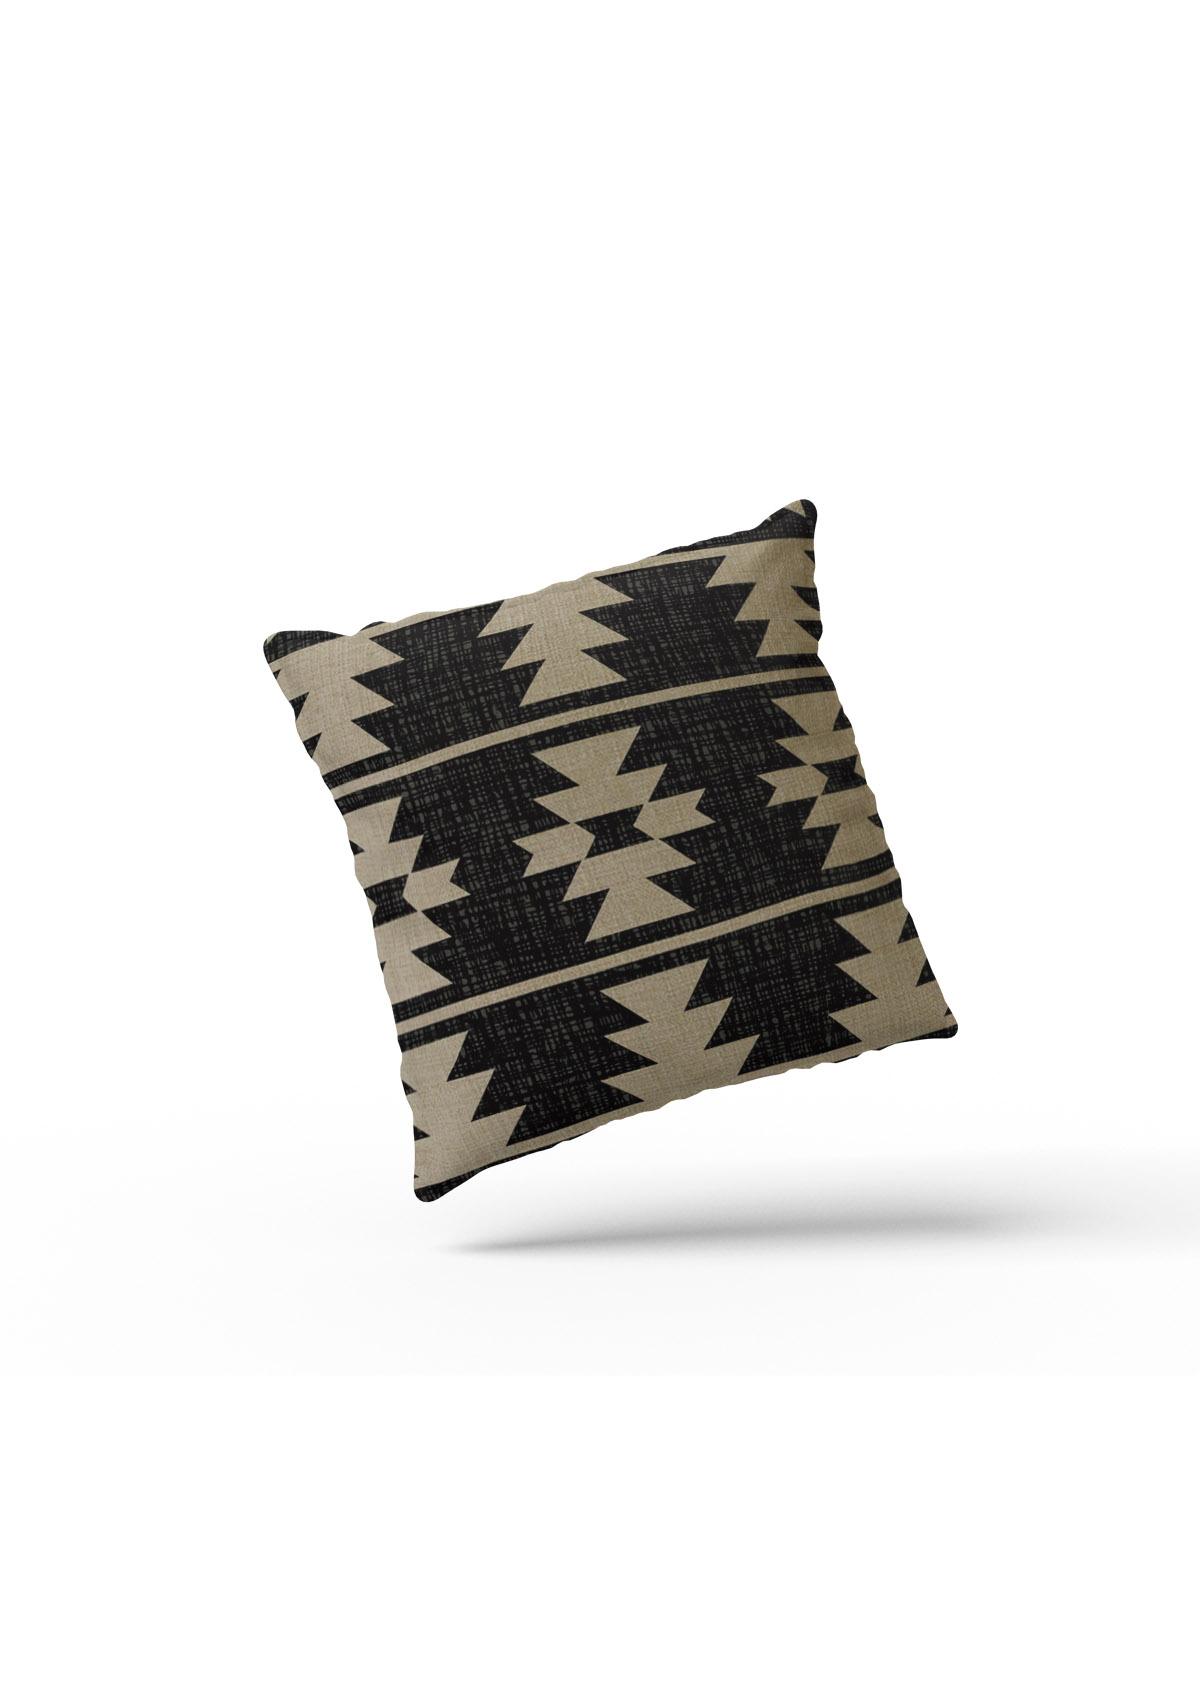 Black and White "Monochrome Chic" Aztec Cushion Covers